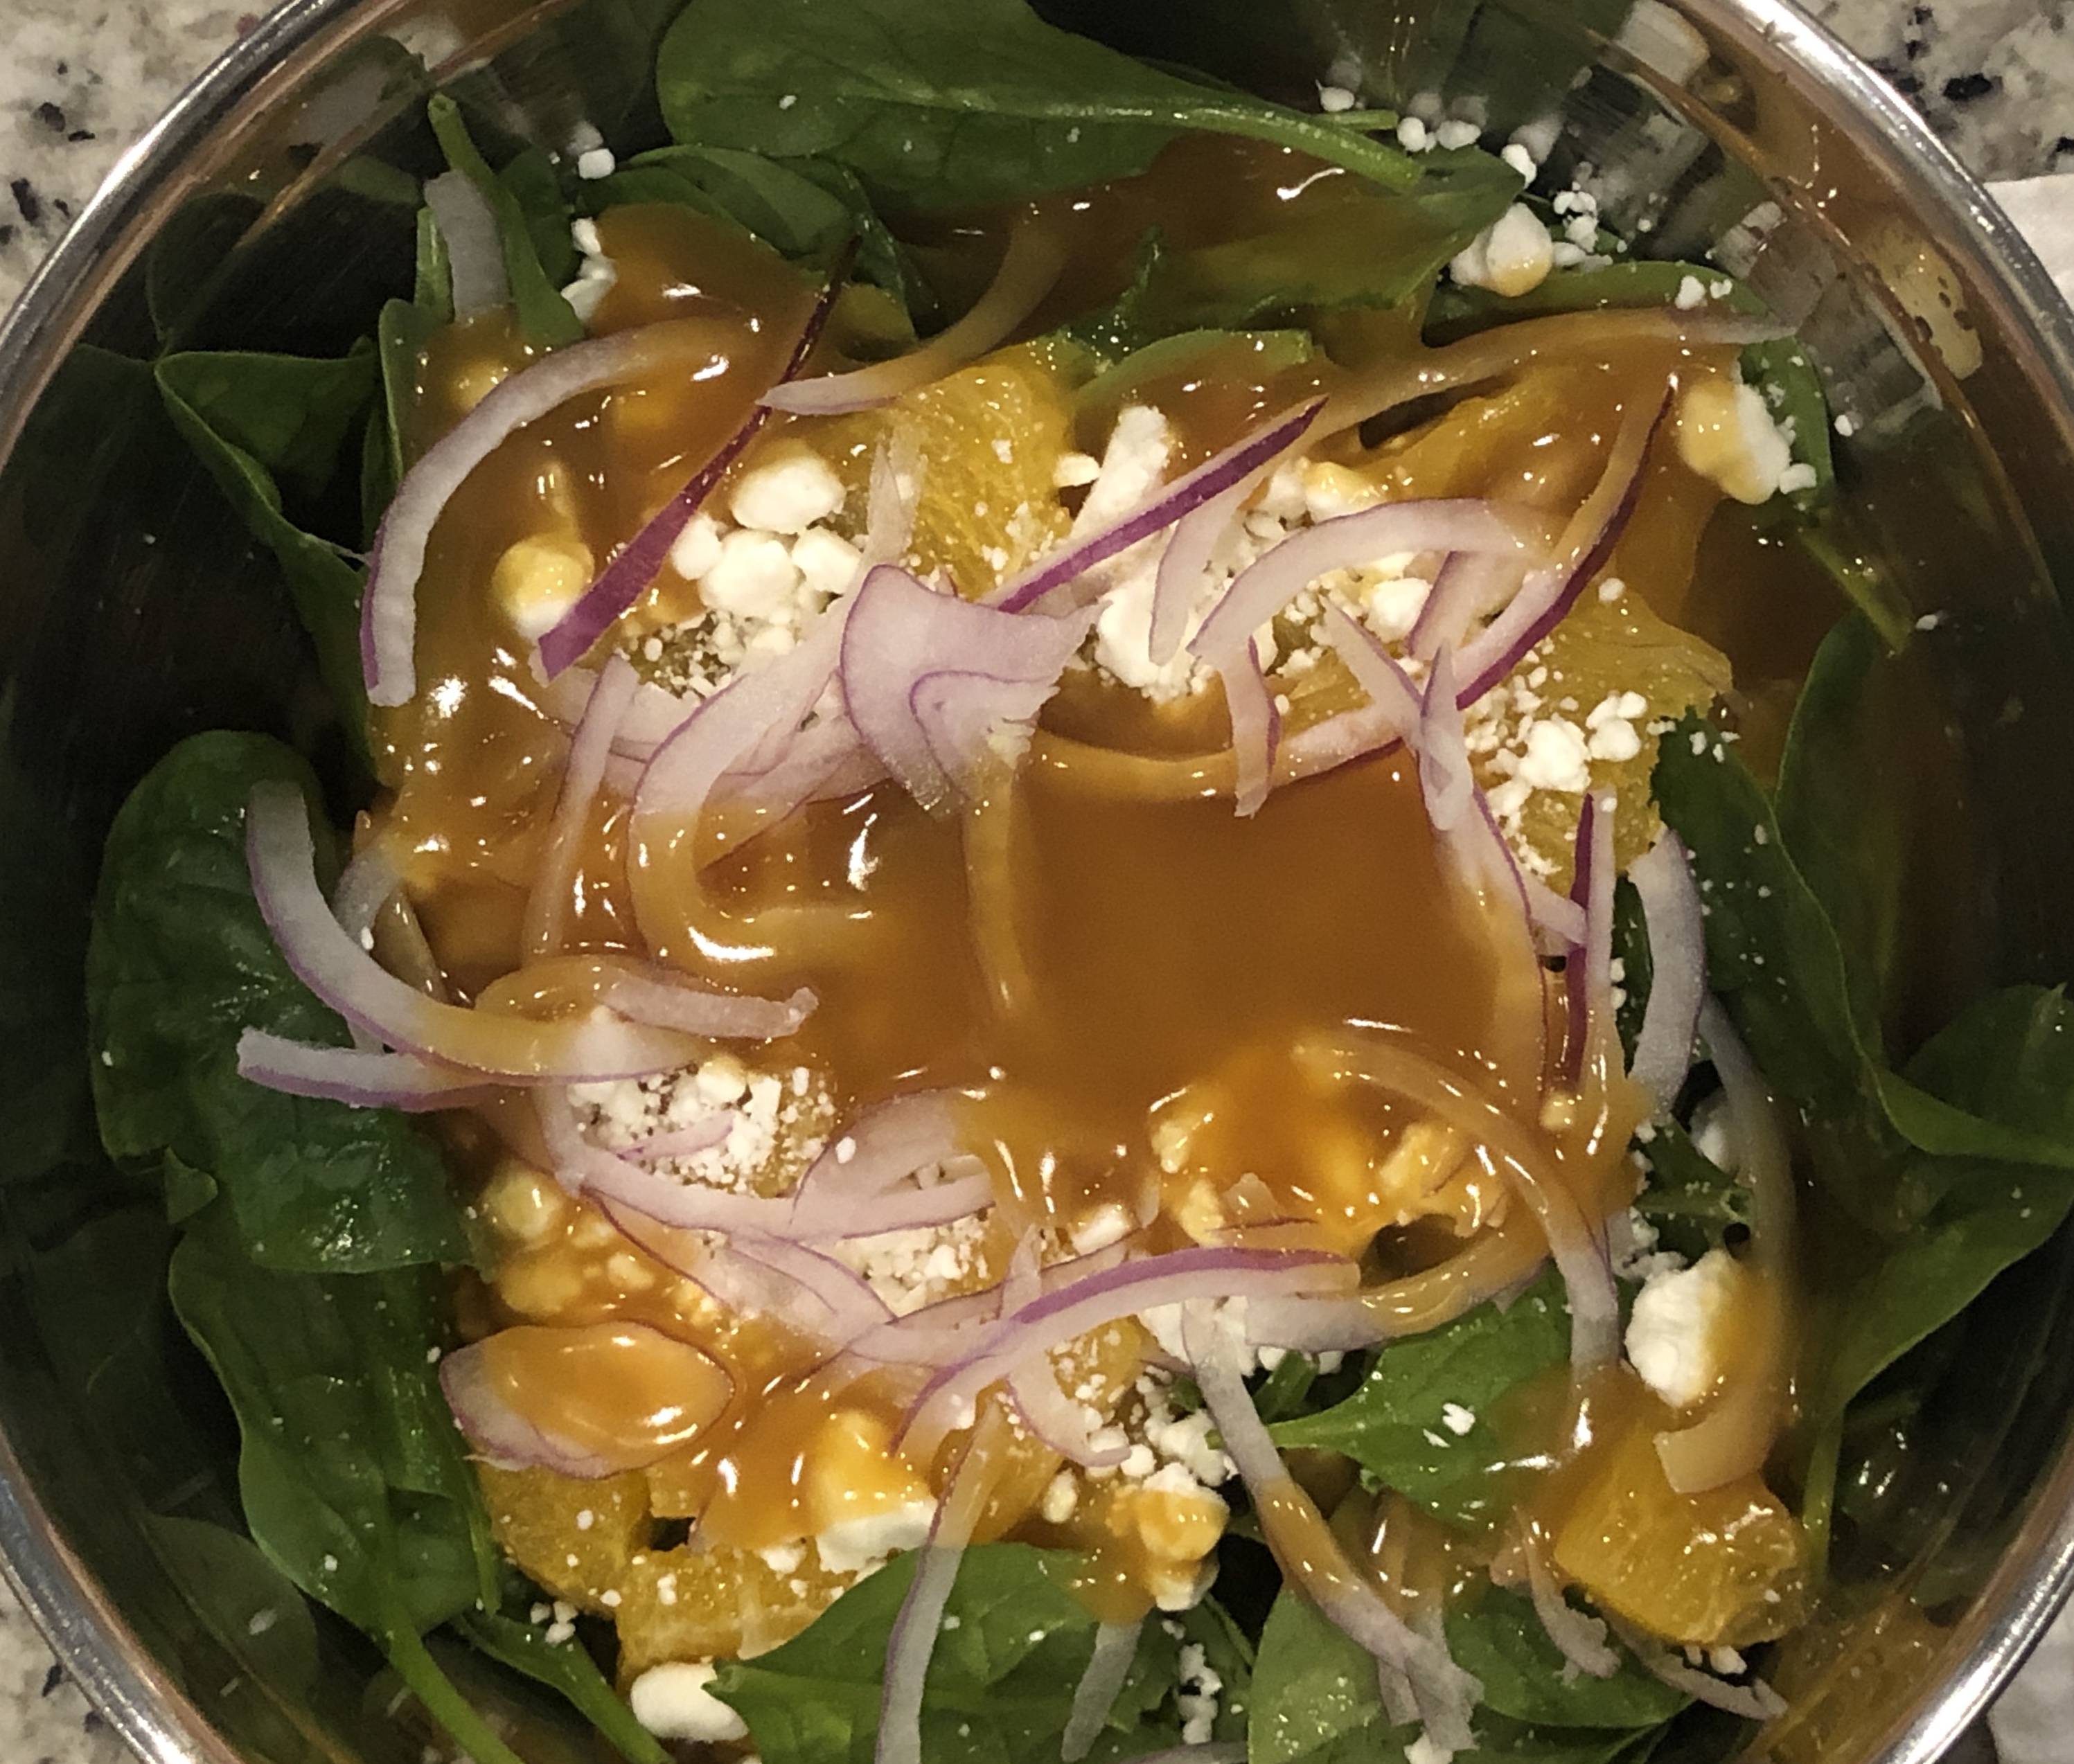 Beth’s famous Spinach Salad with Hot Citrus Dressing